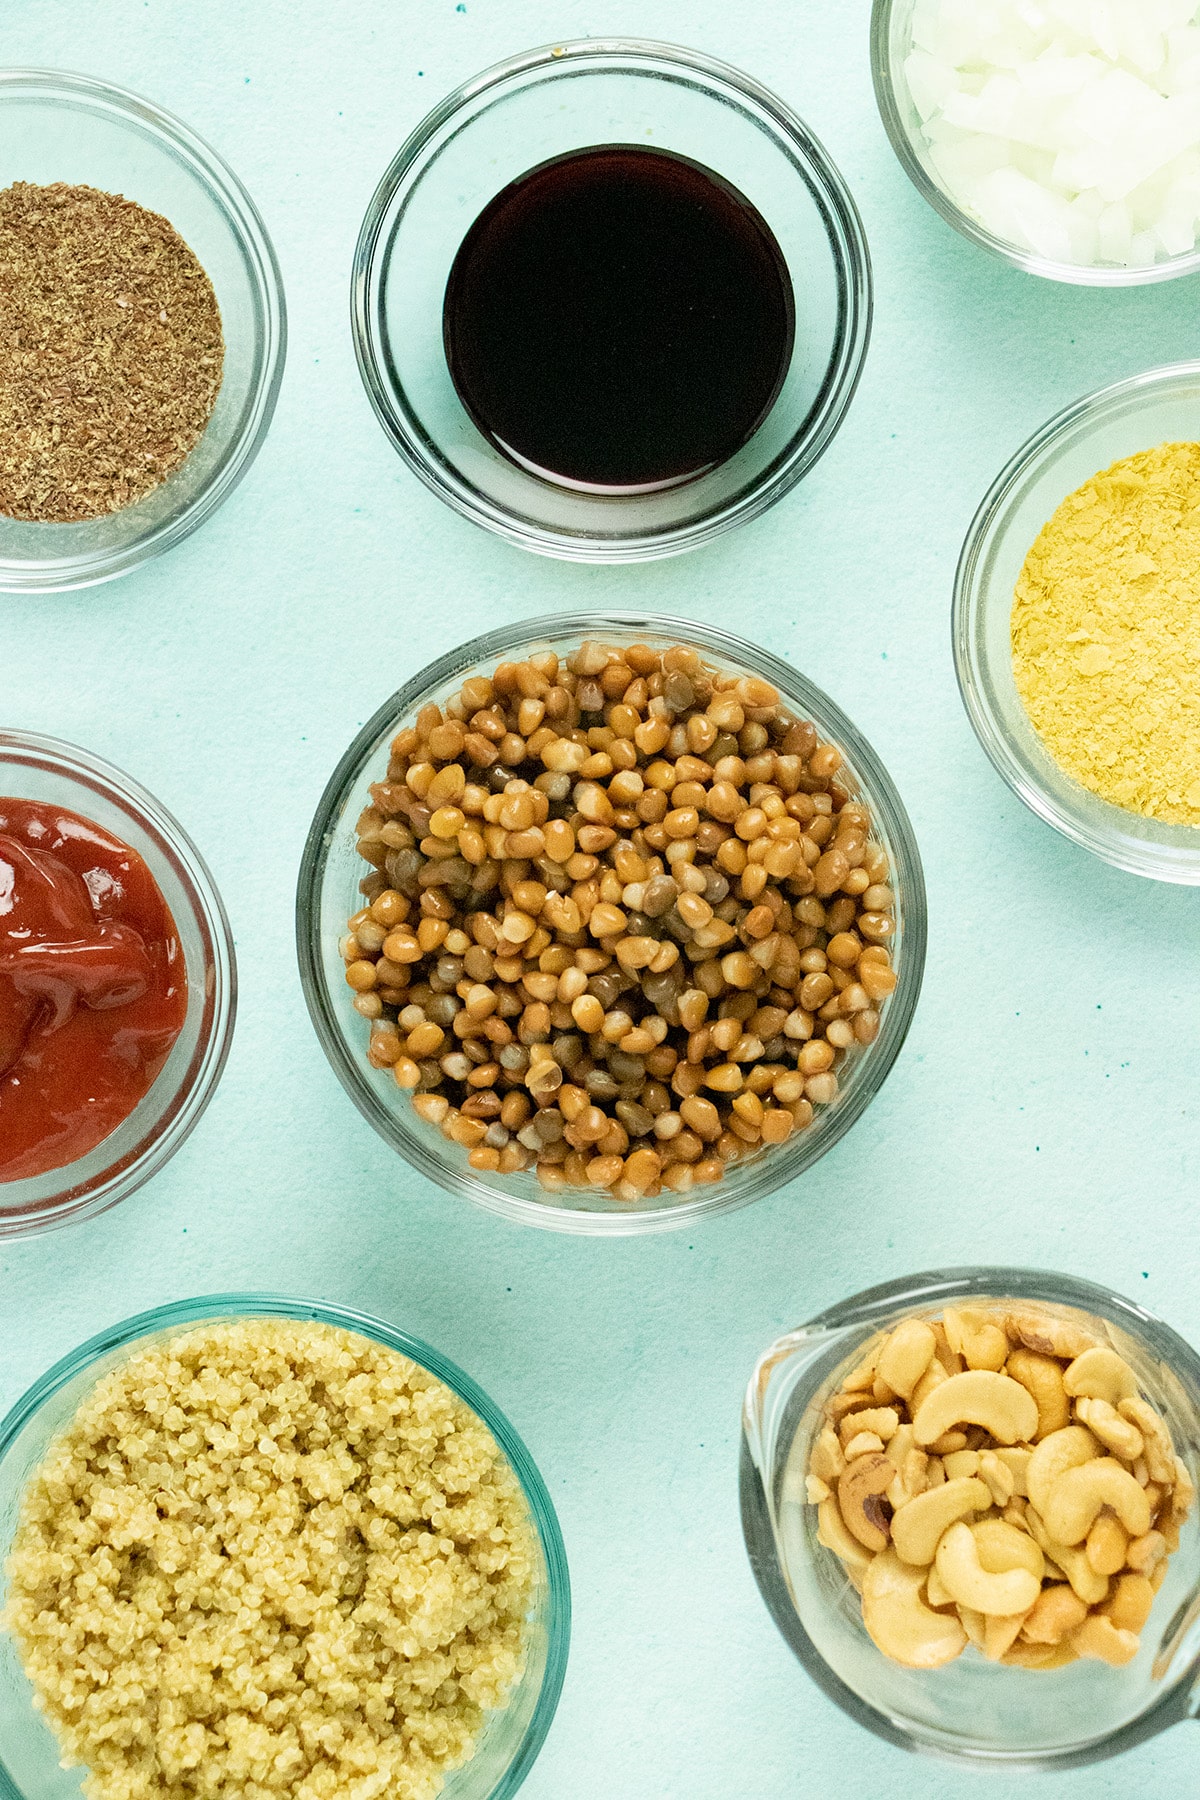 lentils, quinoa, and other ingredients in bowls on a blue table